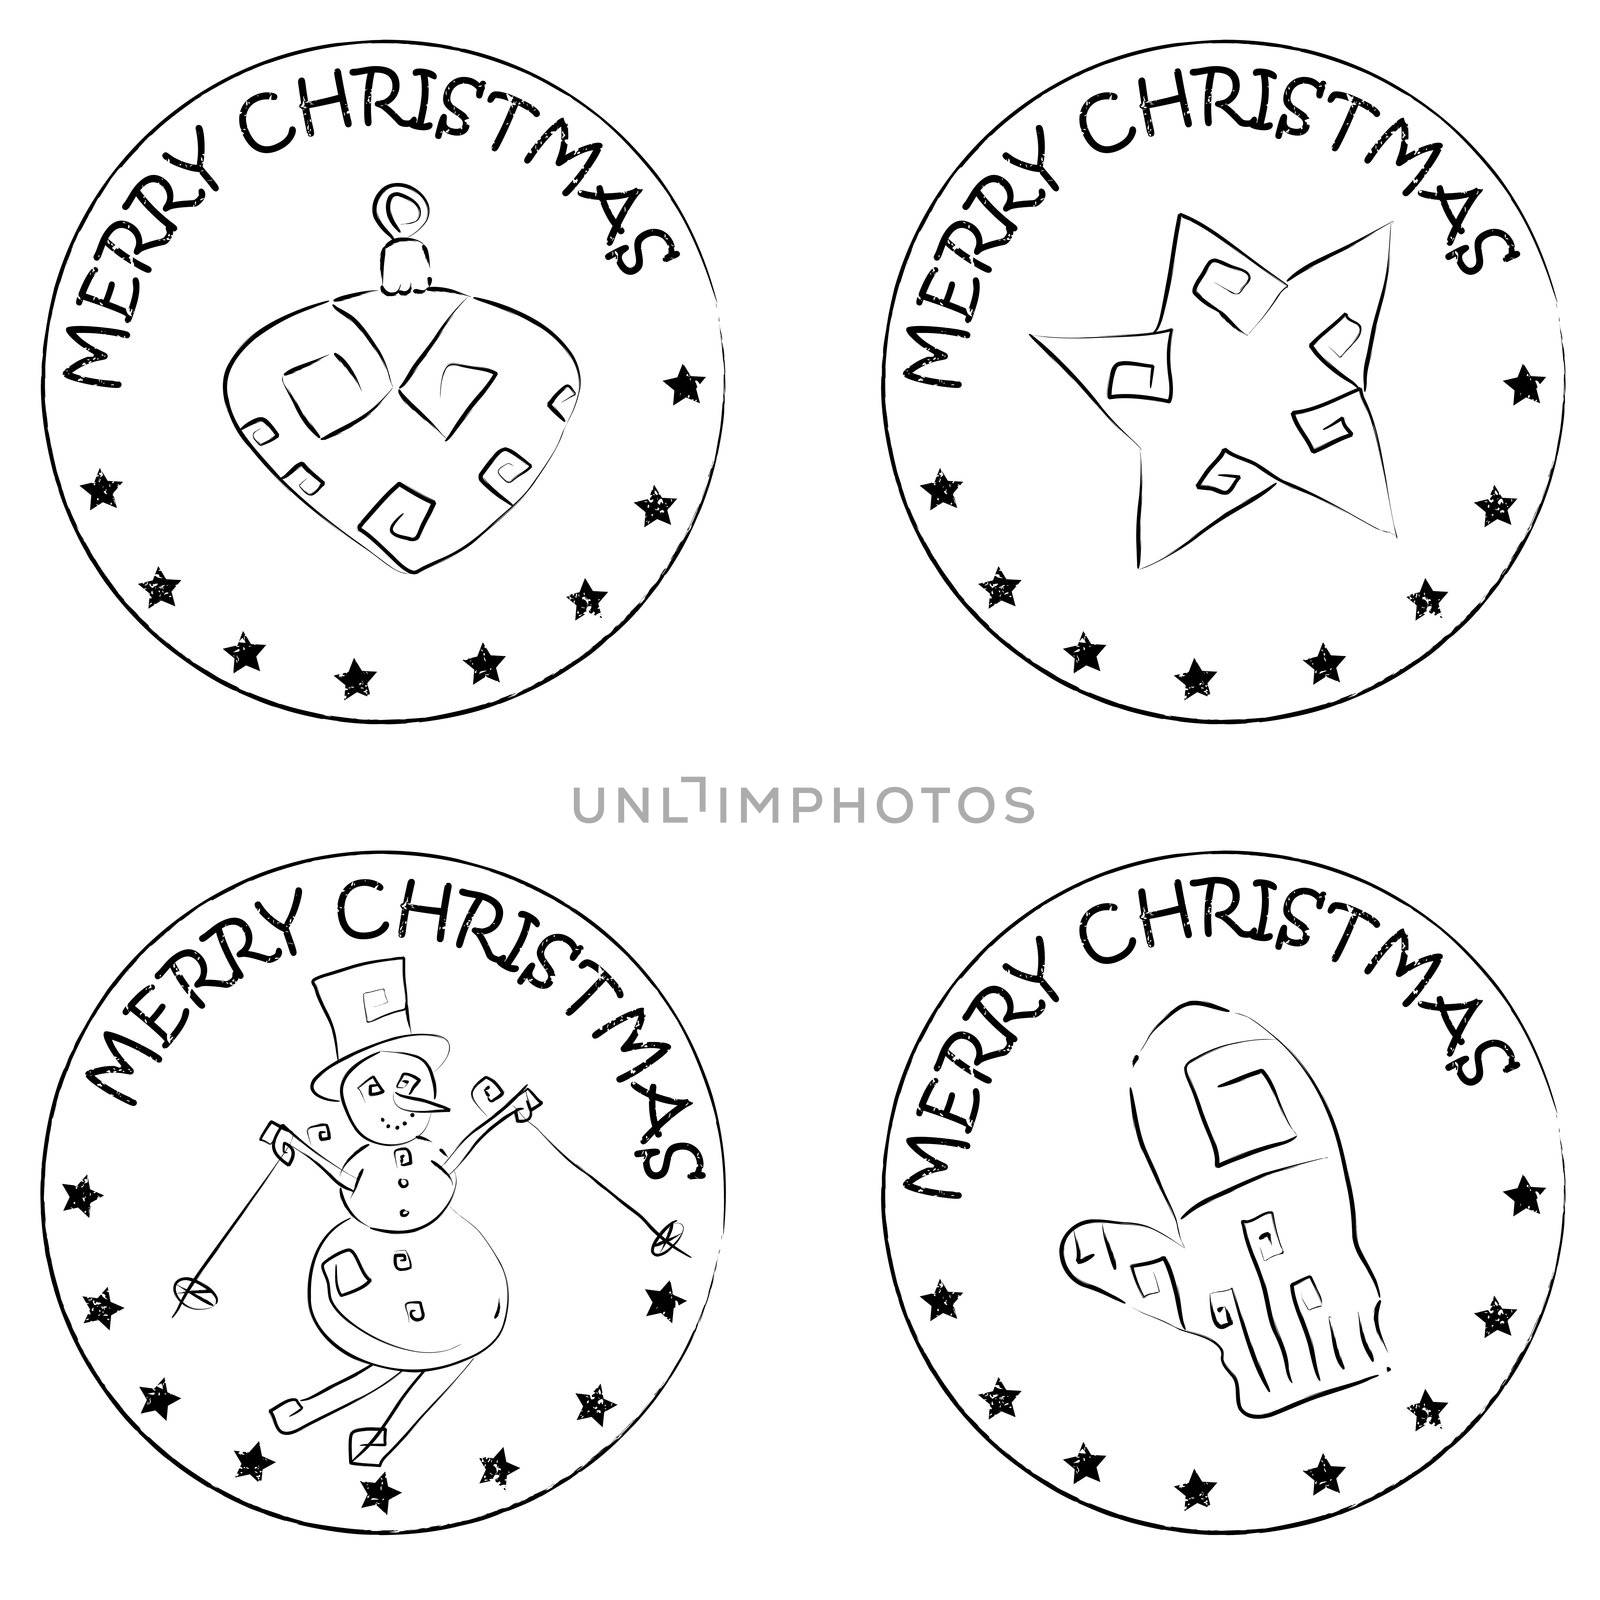 4 christmas coin stamps isolated on white with stars and merry christmas text, snowman, star, glove, globe